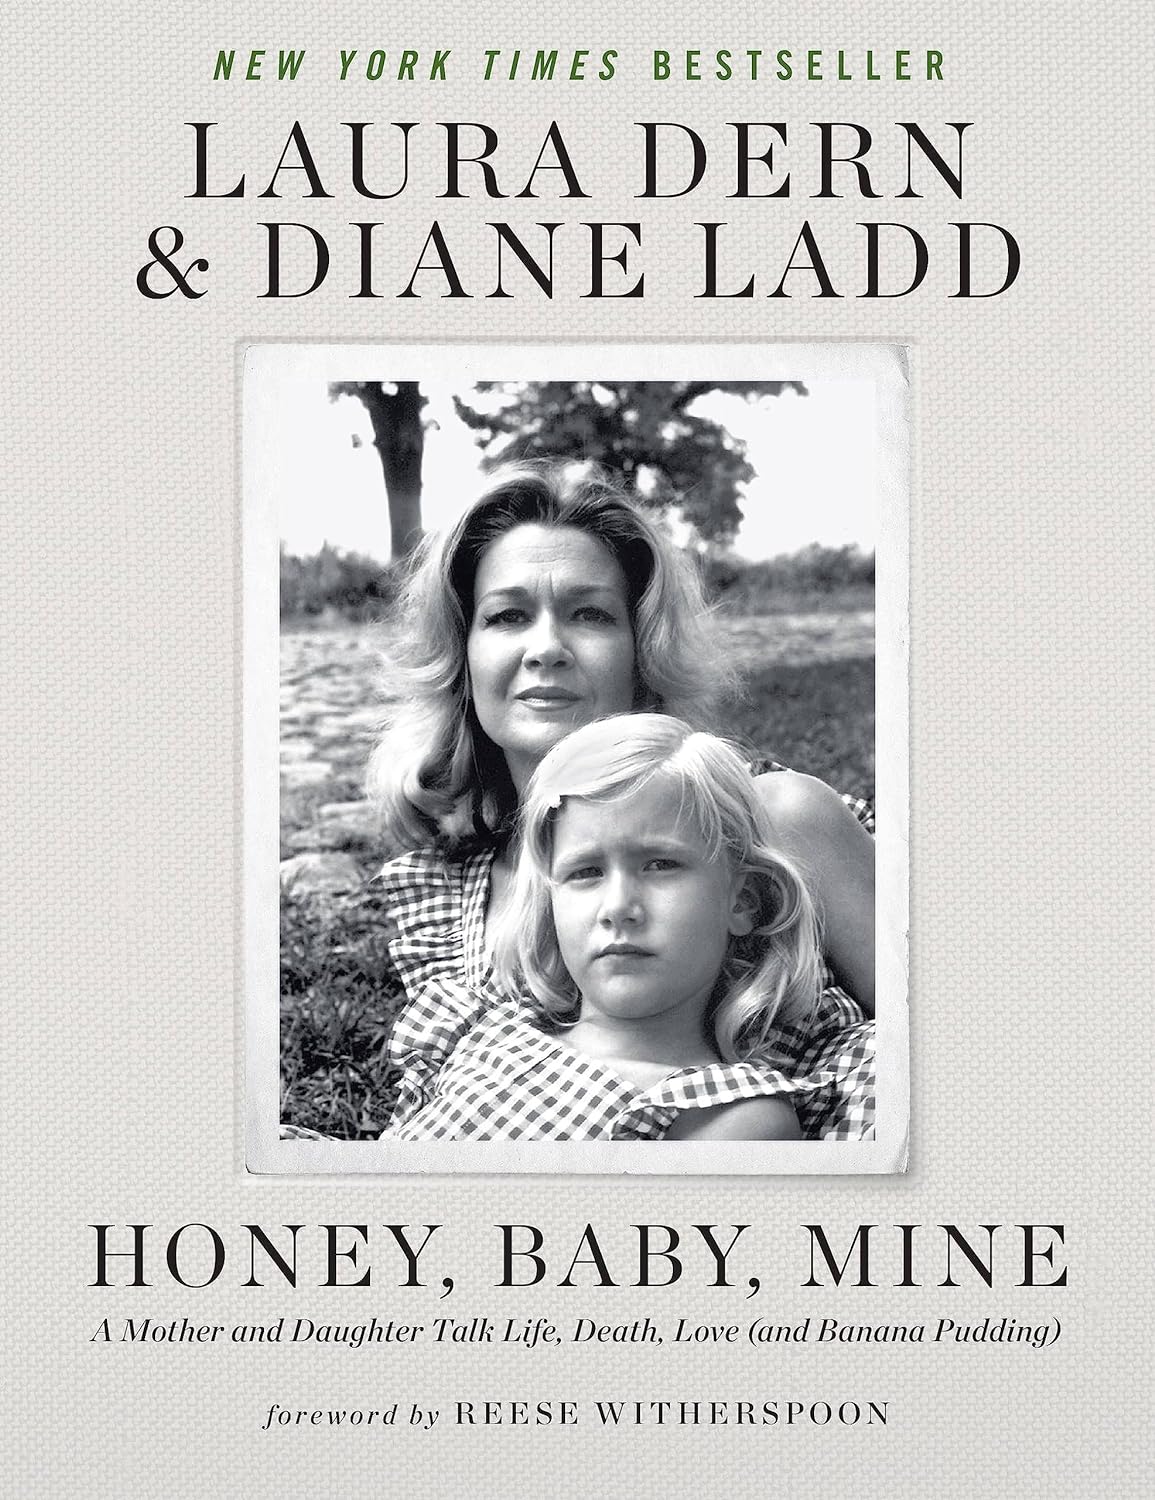 Honey, Baby, Mine: A Mother and Daughter Talk Life, Death, Love (and Banana Pudding) book